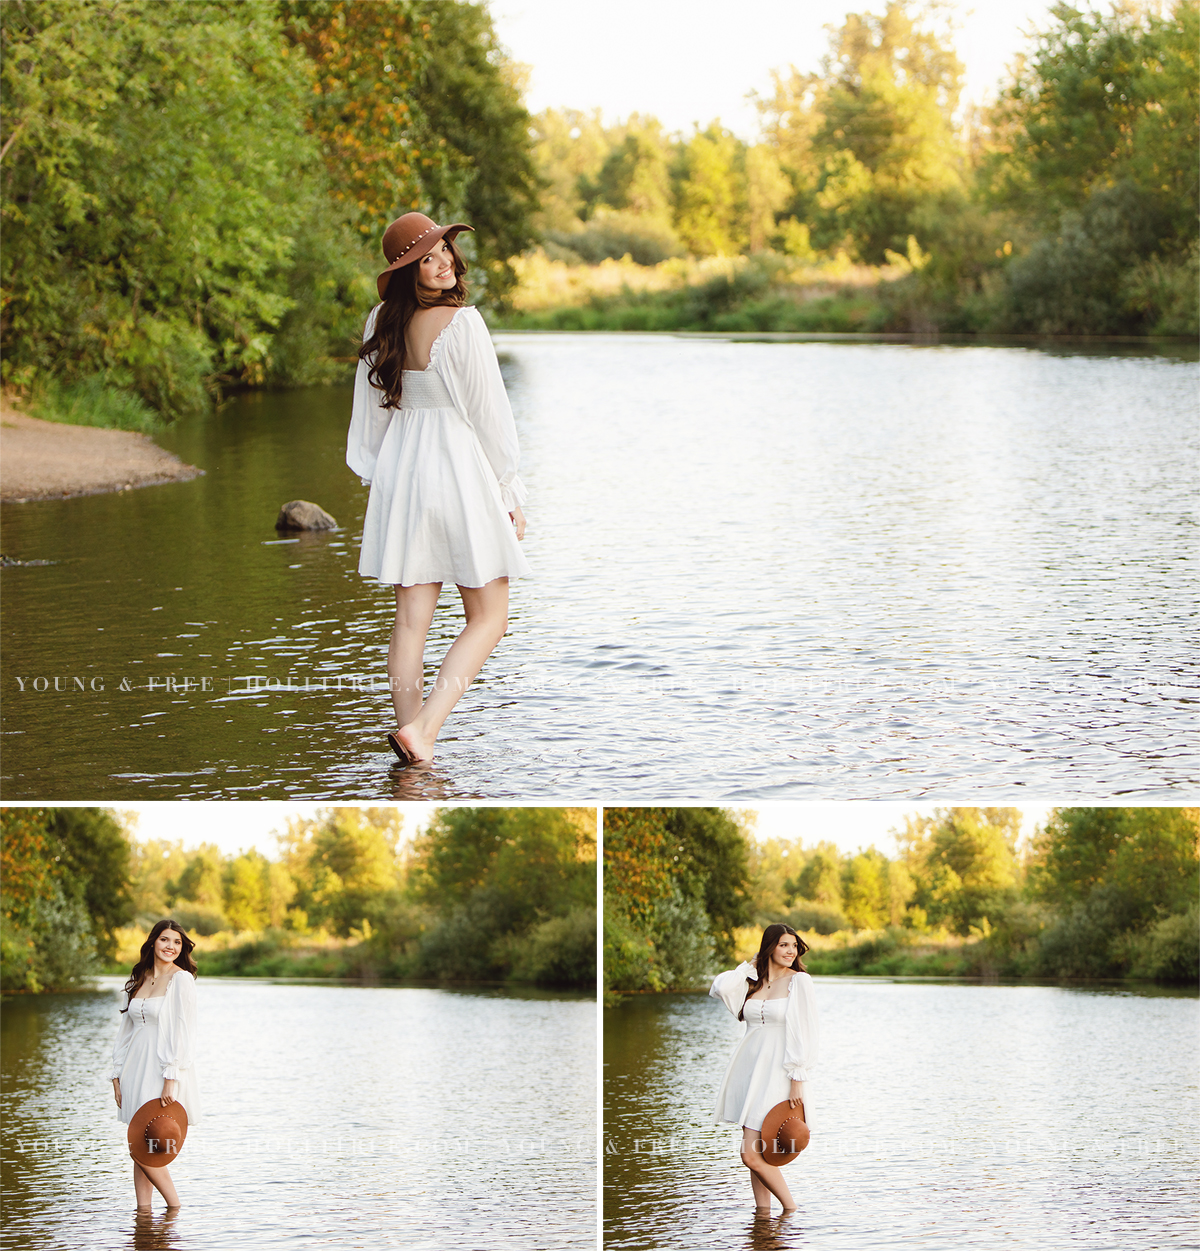 River senior pictures at sunset by Oregon photographer, Holli True